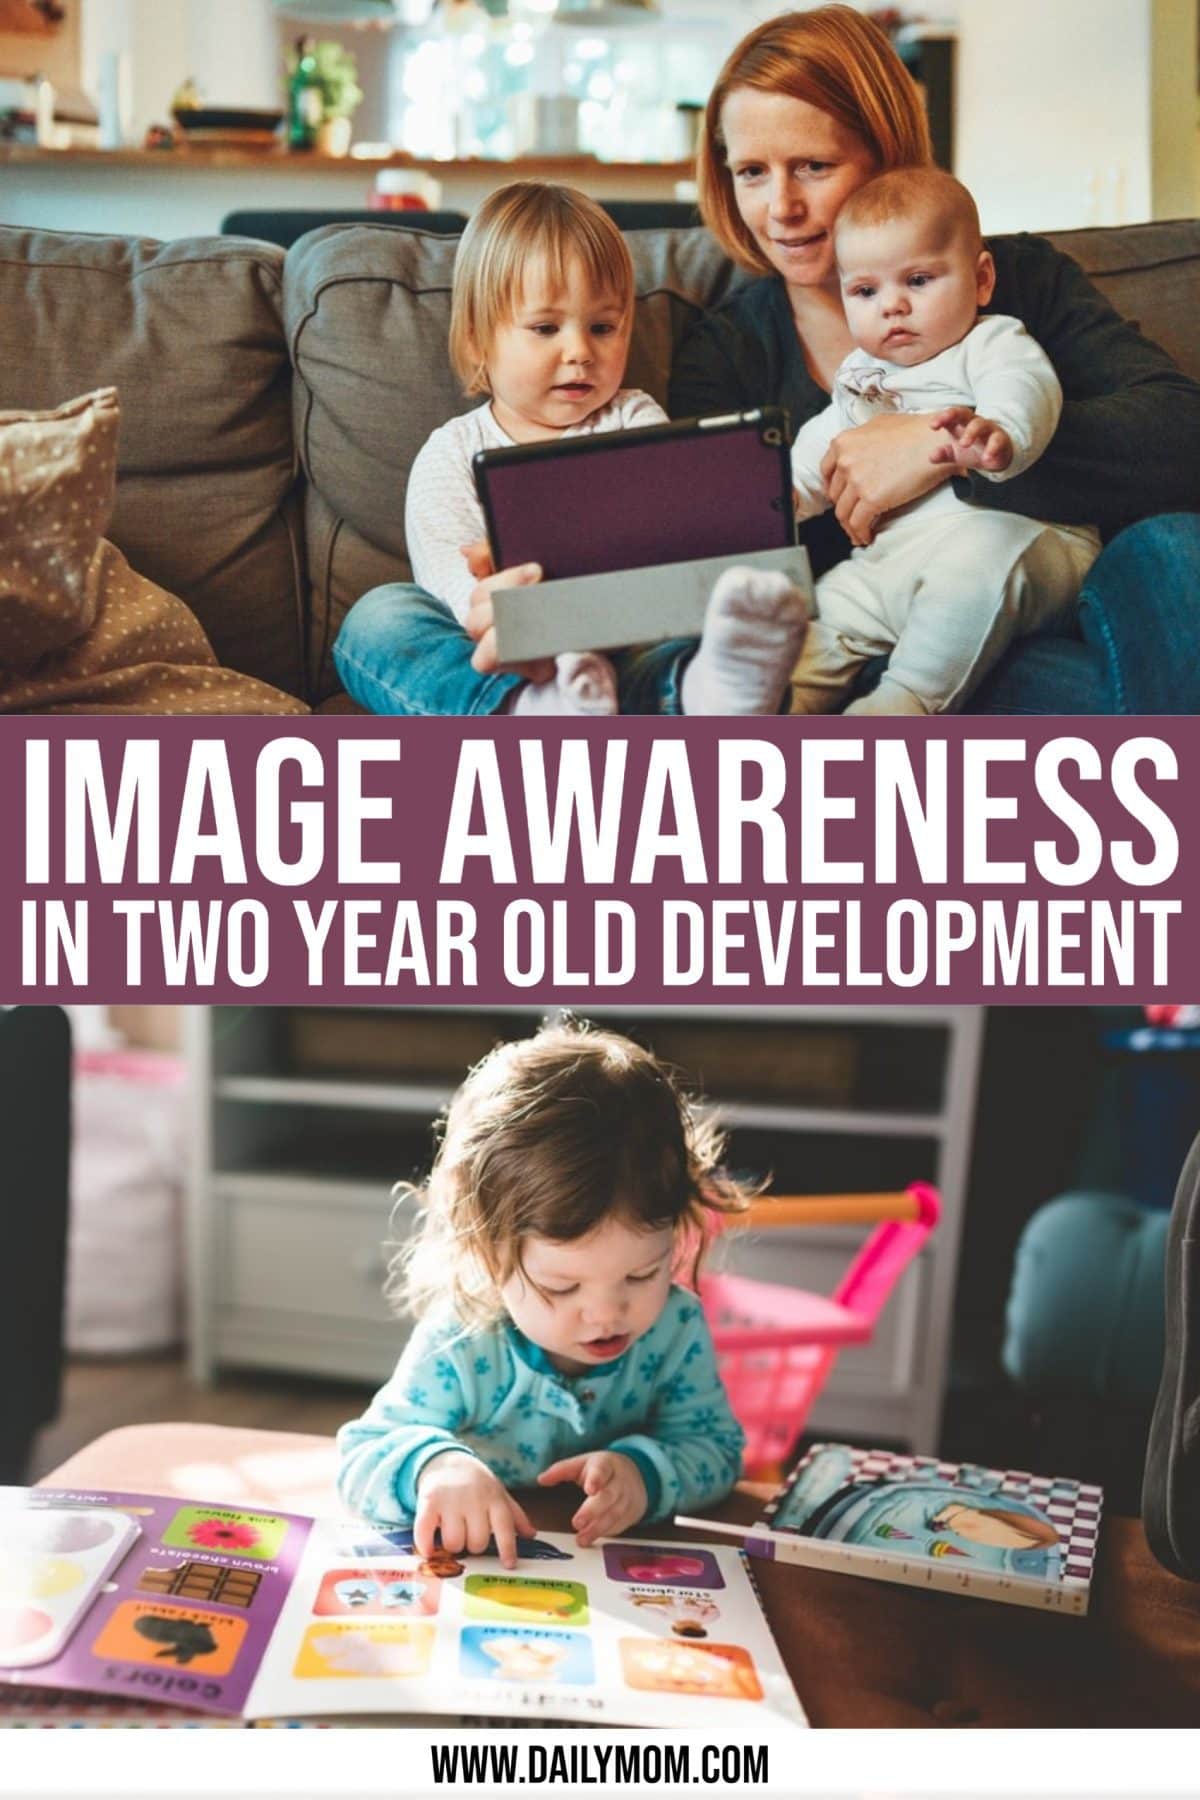 Image Awareness In Two Year Old Development